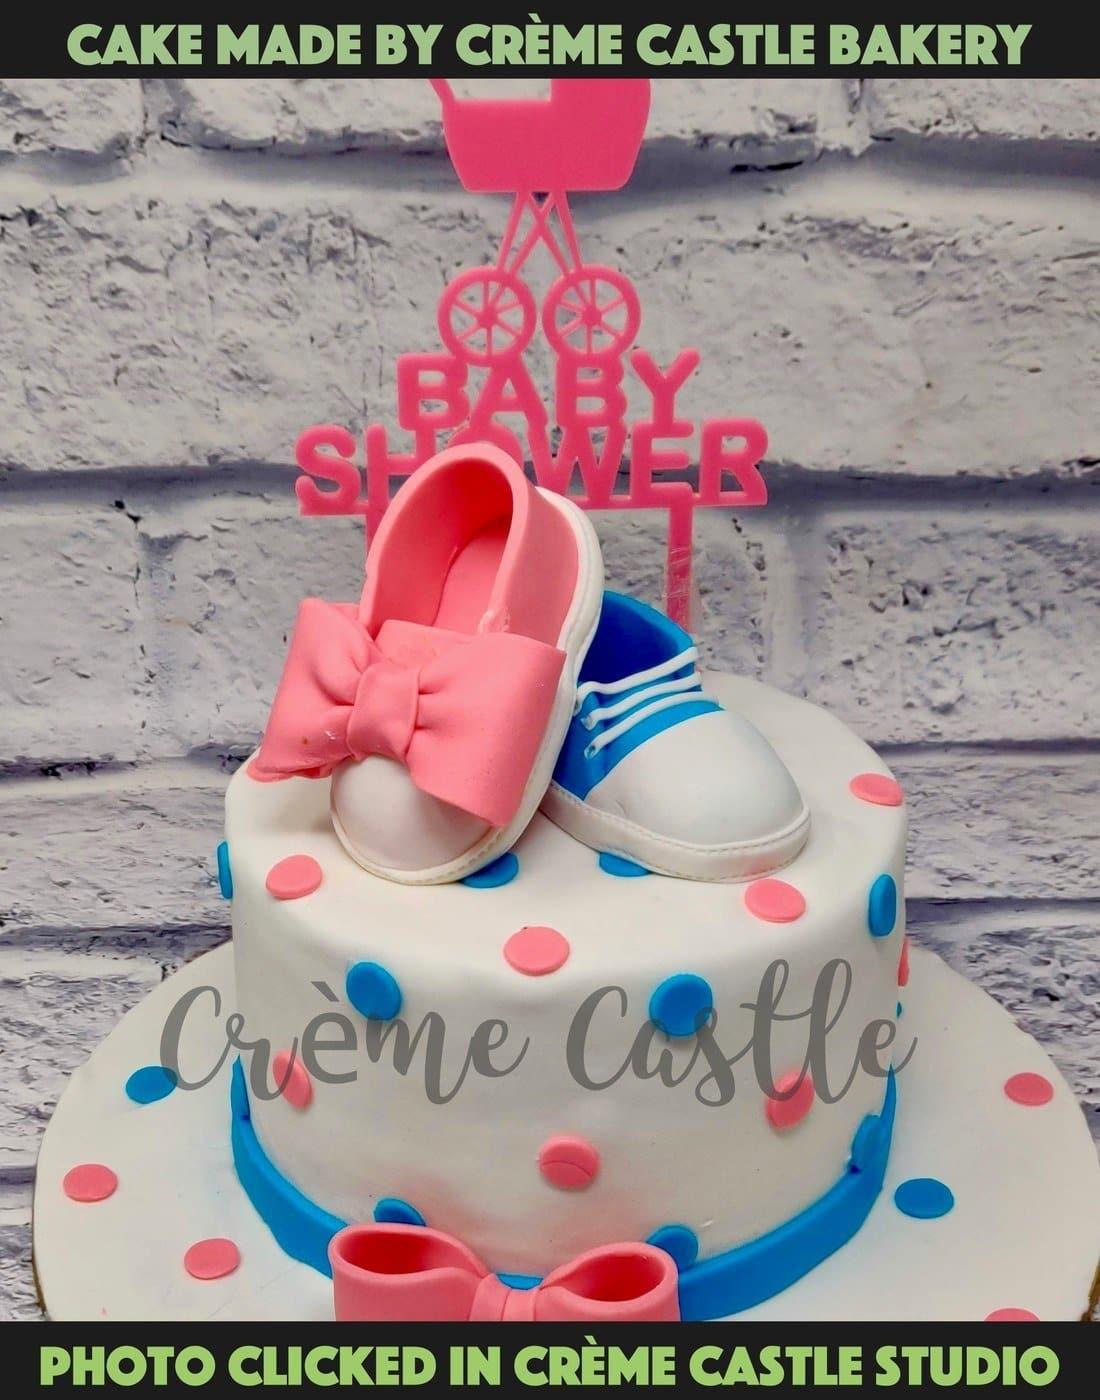 Sugar Chic Bakery - Baby shower cake with fondant bear and 3D chocolate  balloon design. #sugarchicbakery#babyshowercake #buttercream  #smalltownbakery | Facebook